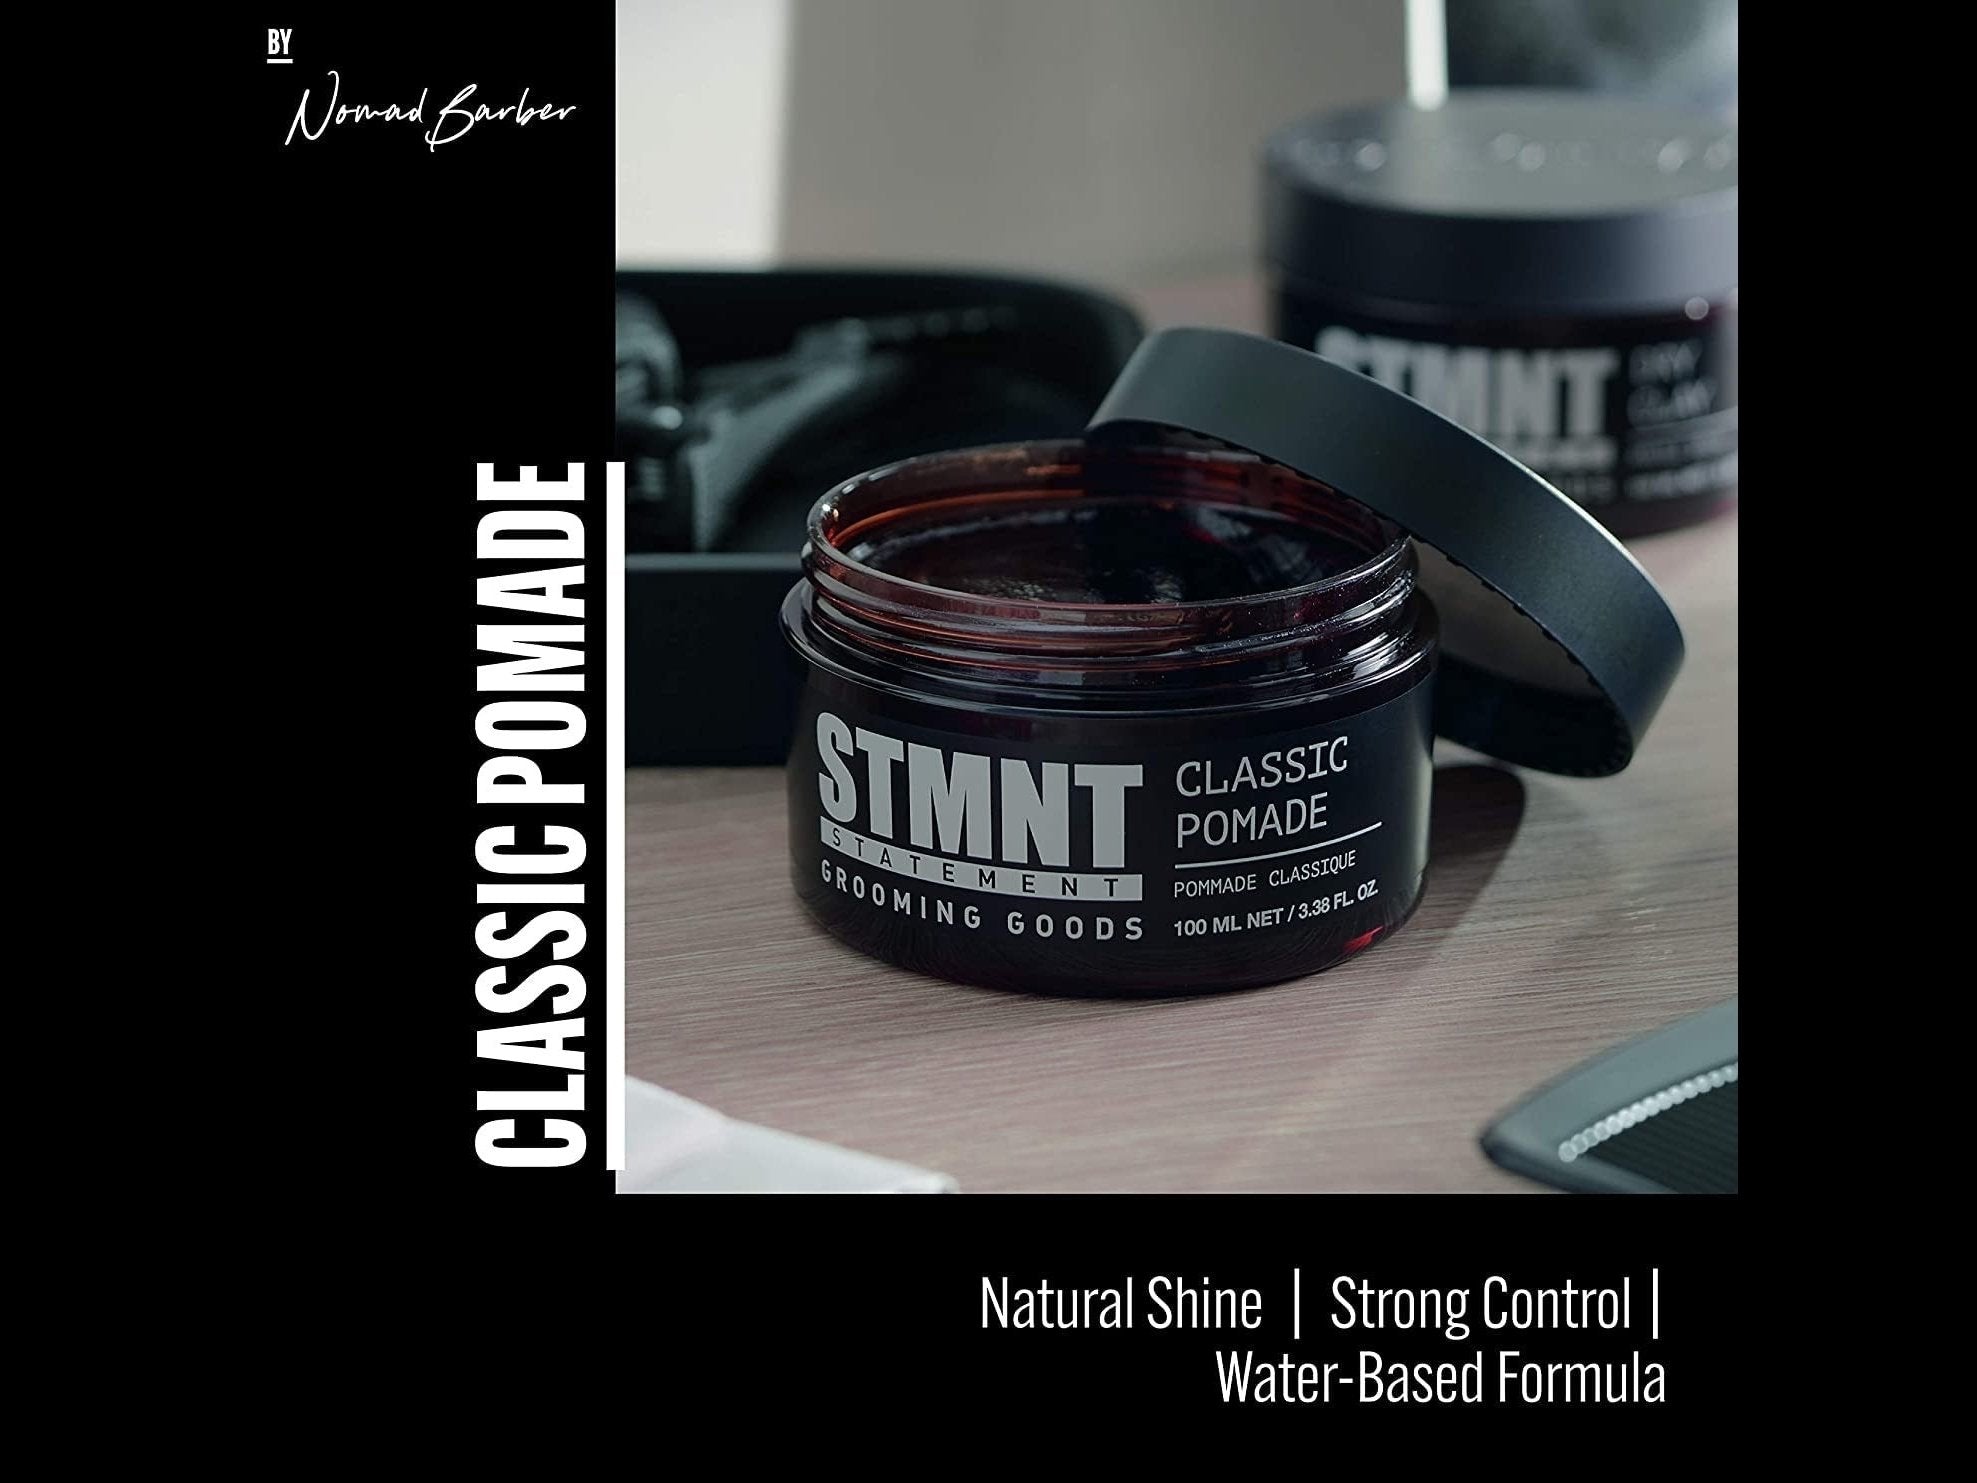 Load image into Gallery viewer, STMNT Classic Pomade, 3.38 oz.
